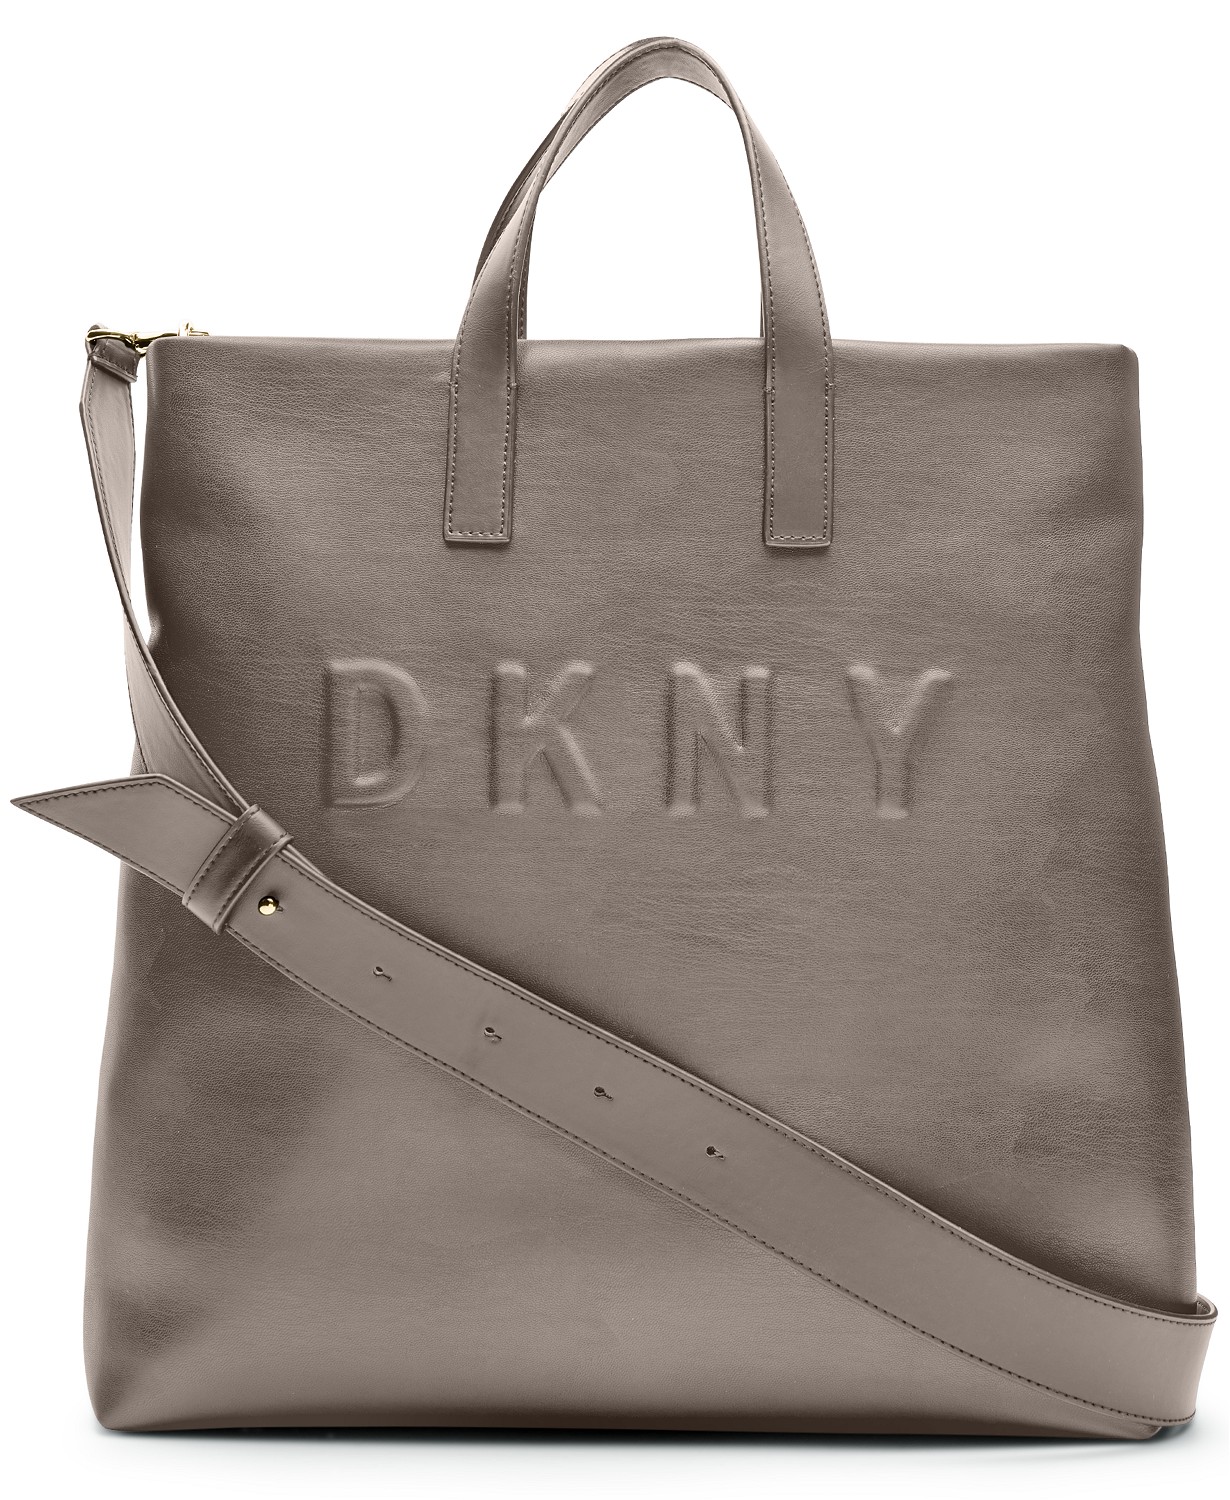 woocommerce-673321-2209615.cloudwaysapps.com-dkny-womens-gray-tilly-logo-print-tote-bag